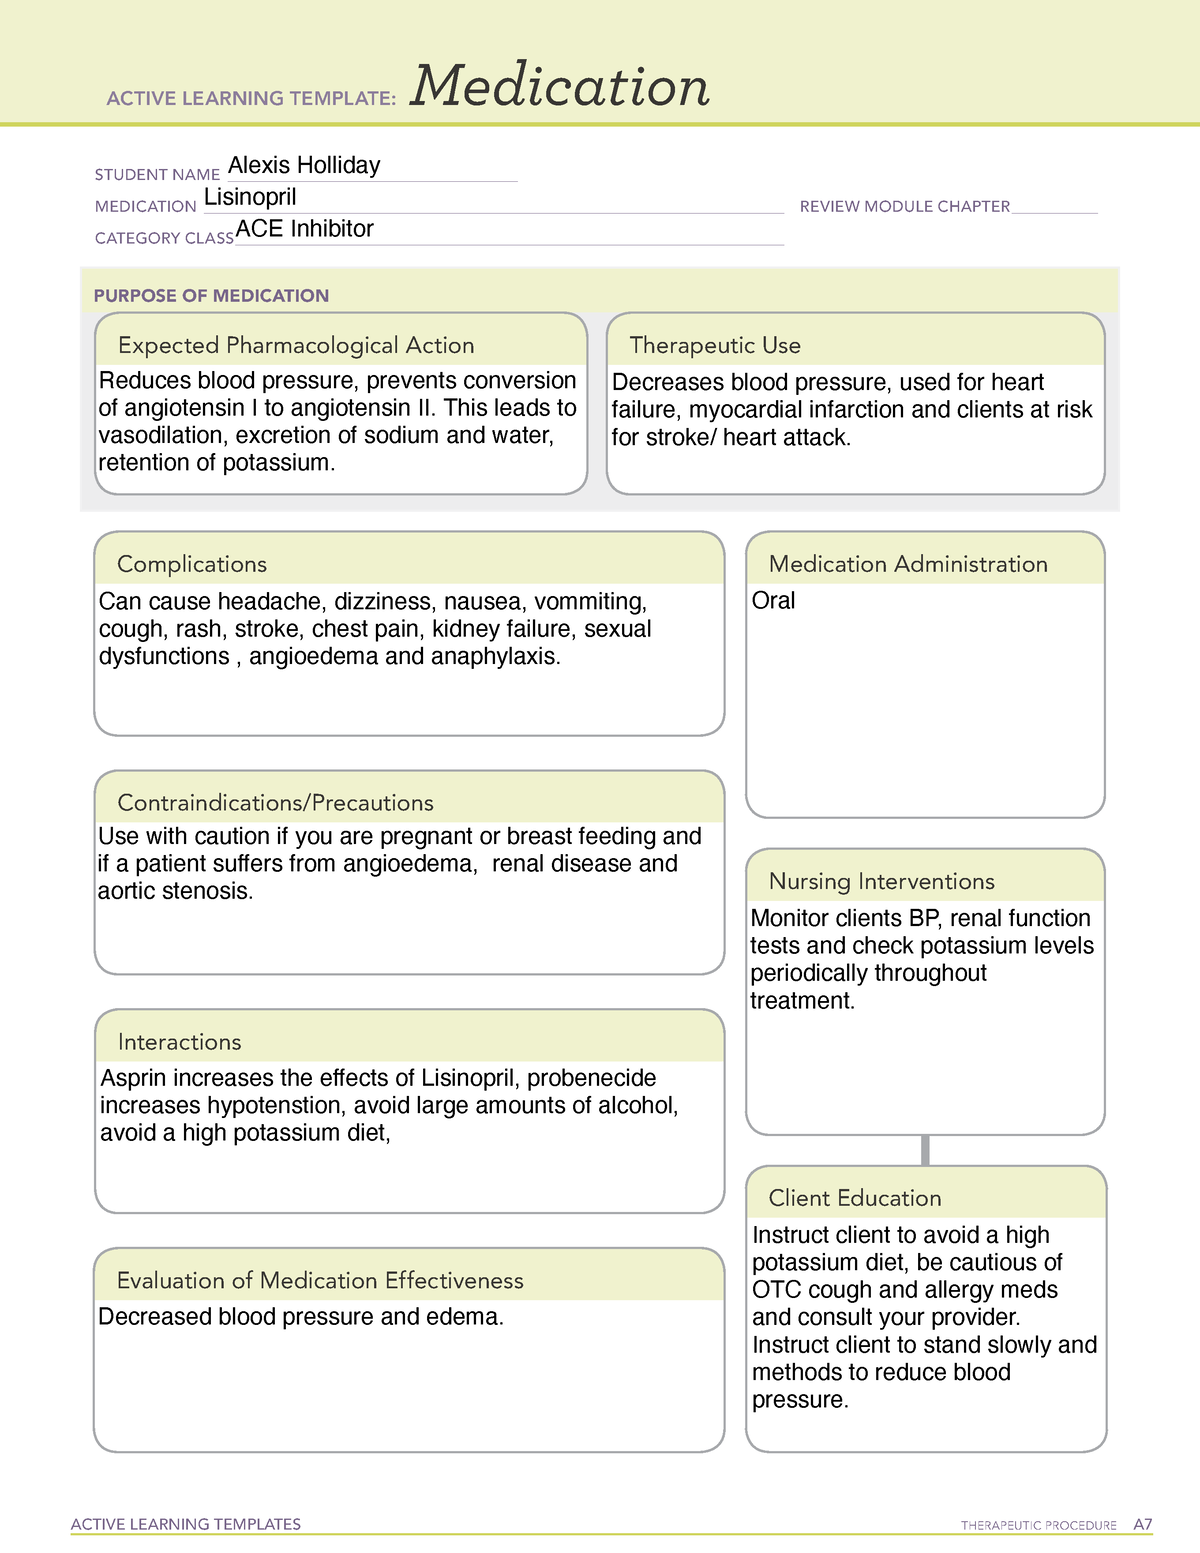 med-template-lisinopril-active-learning-templates-therapeutic-procedure-a-medication-student